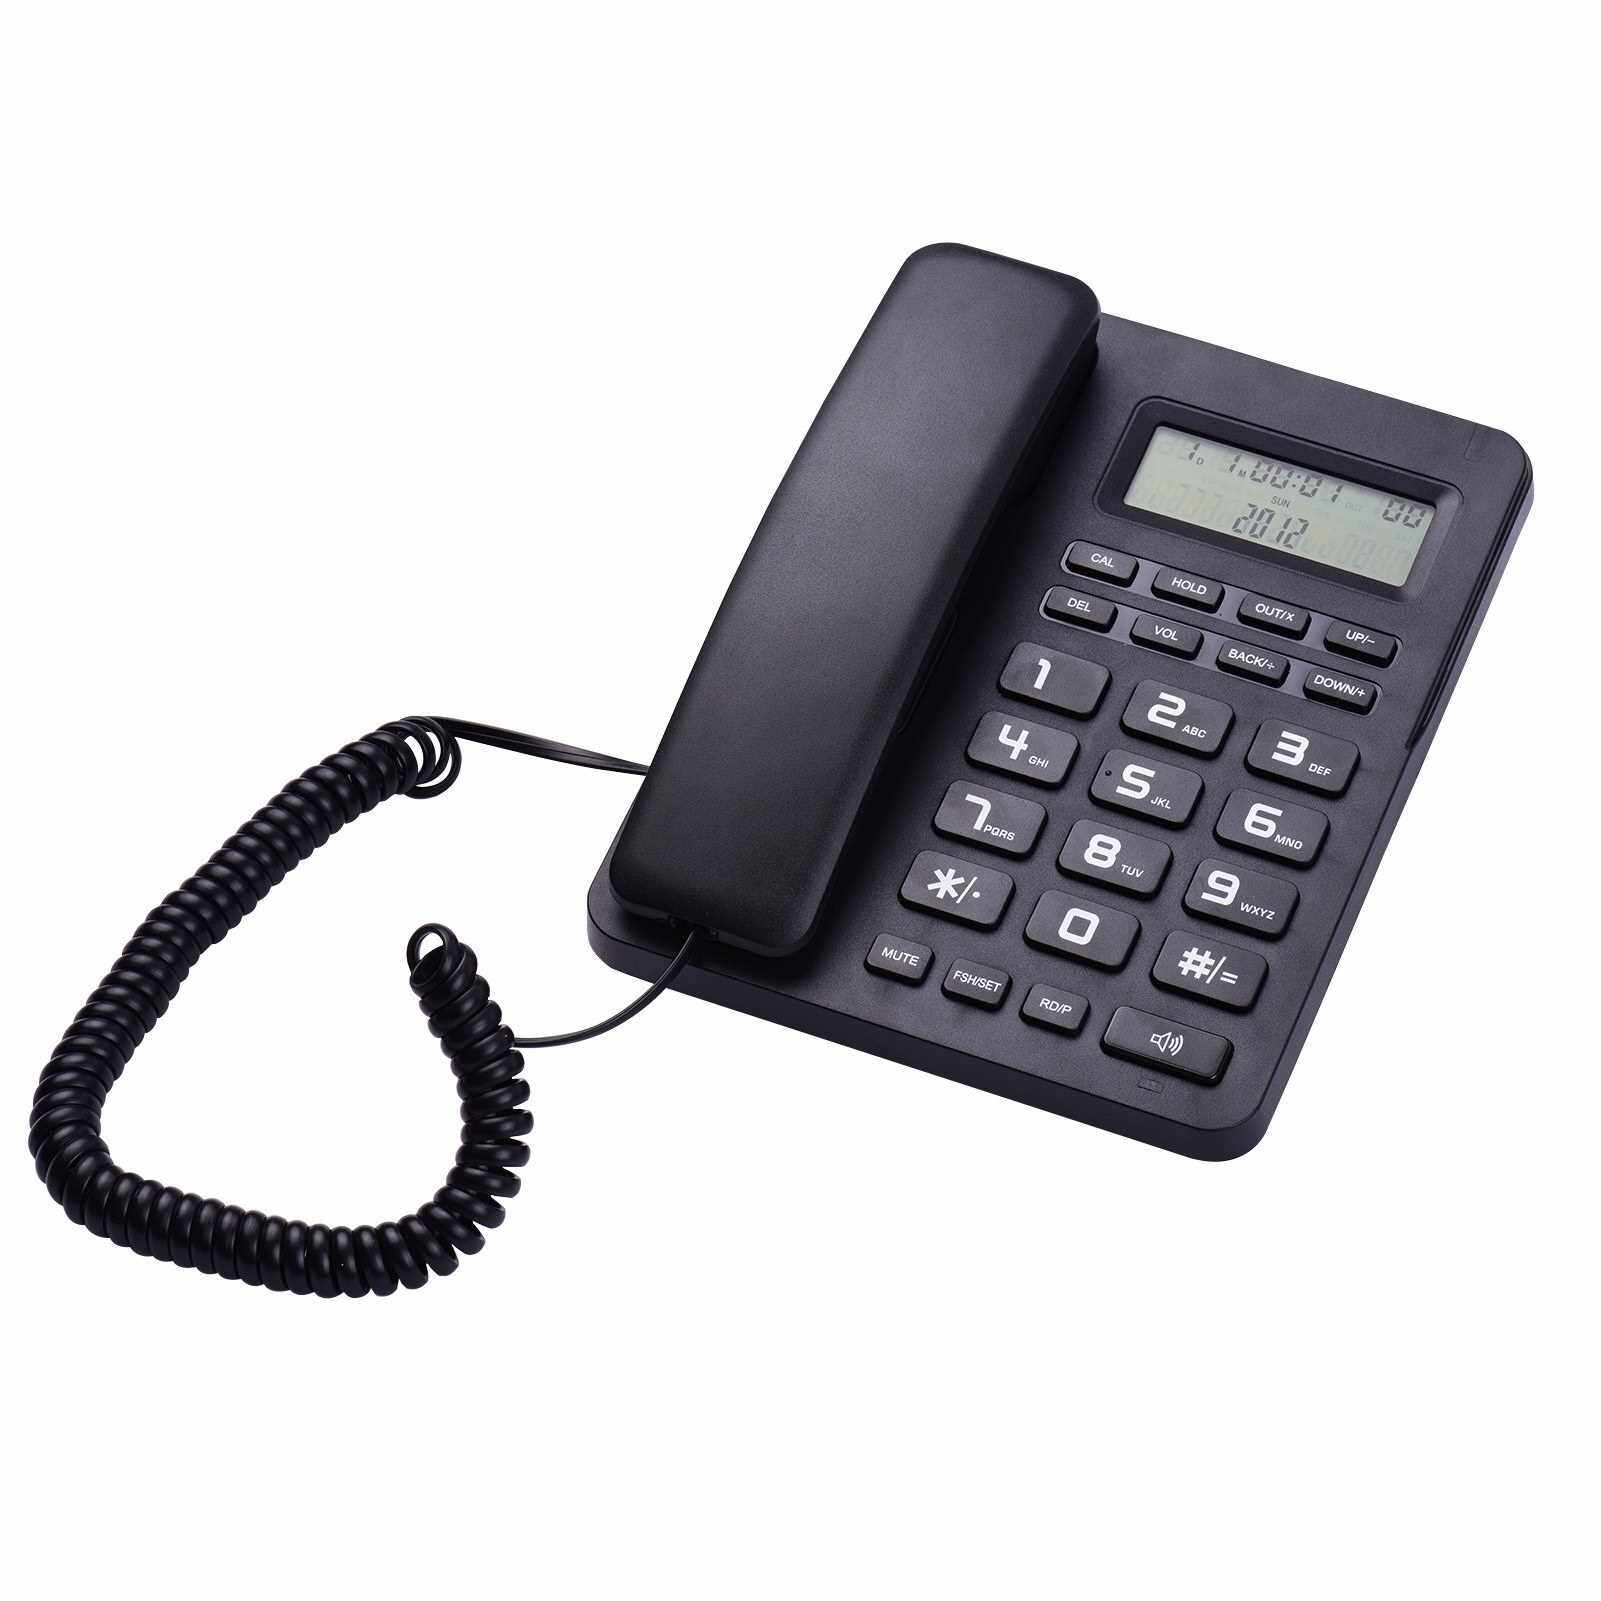 Black Corded Telephone Wired Desk Landline Phone with LCD Display Caller ID/Call Waiting Speakerphone Calculator Function Ringer Melodies Volume Adjustment for Hotel Office Business Home (Standard)